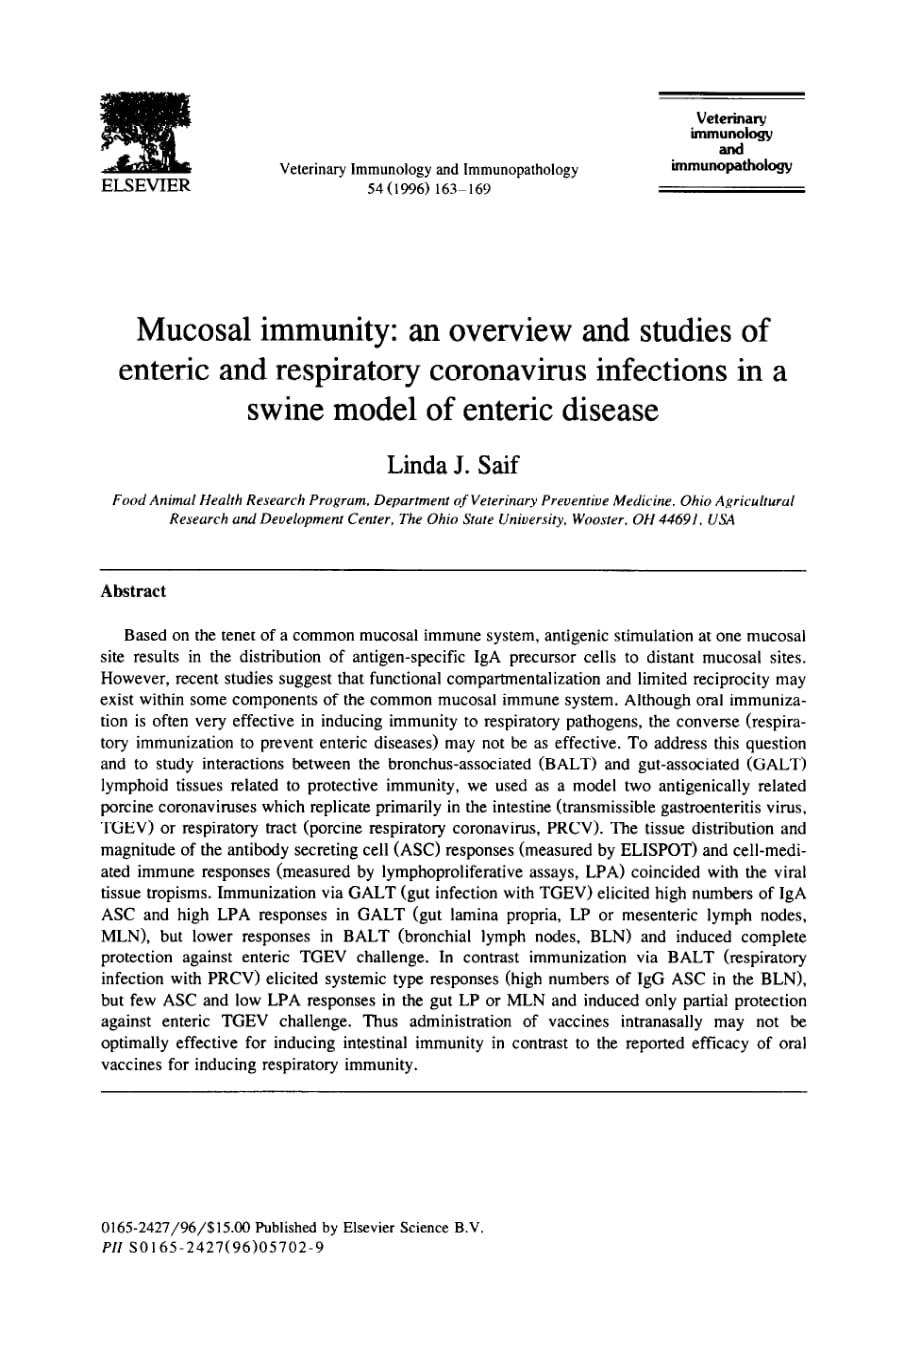 1996 Mucosal immunity_ an overview and studies of enteric and respiratory coronavirus infections in a swine model of ent_第1页